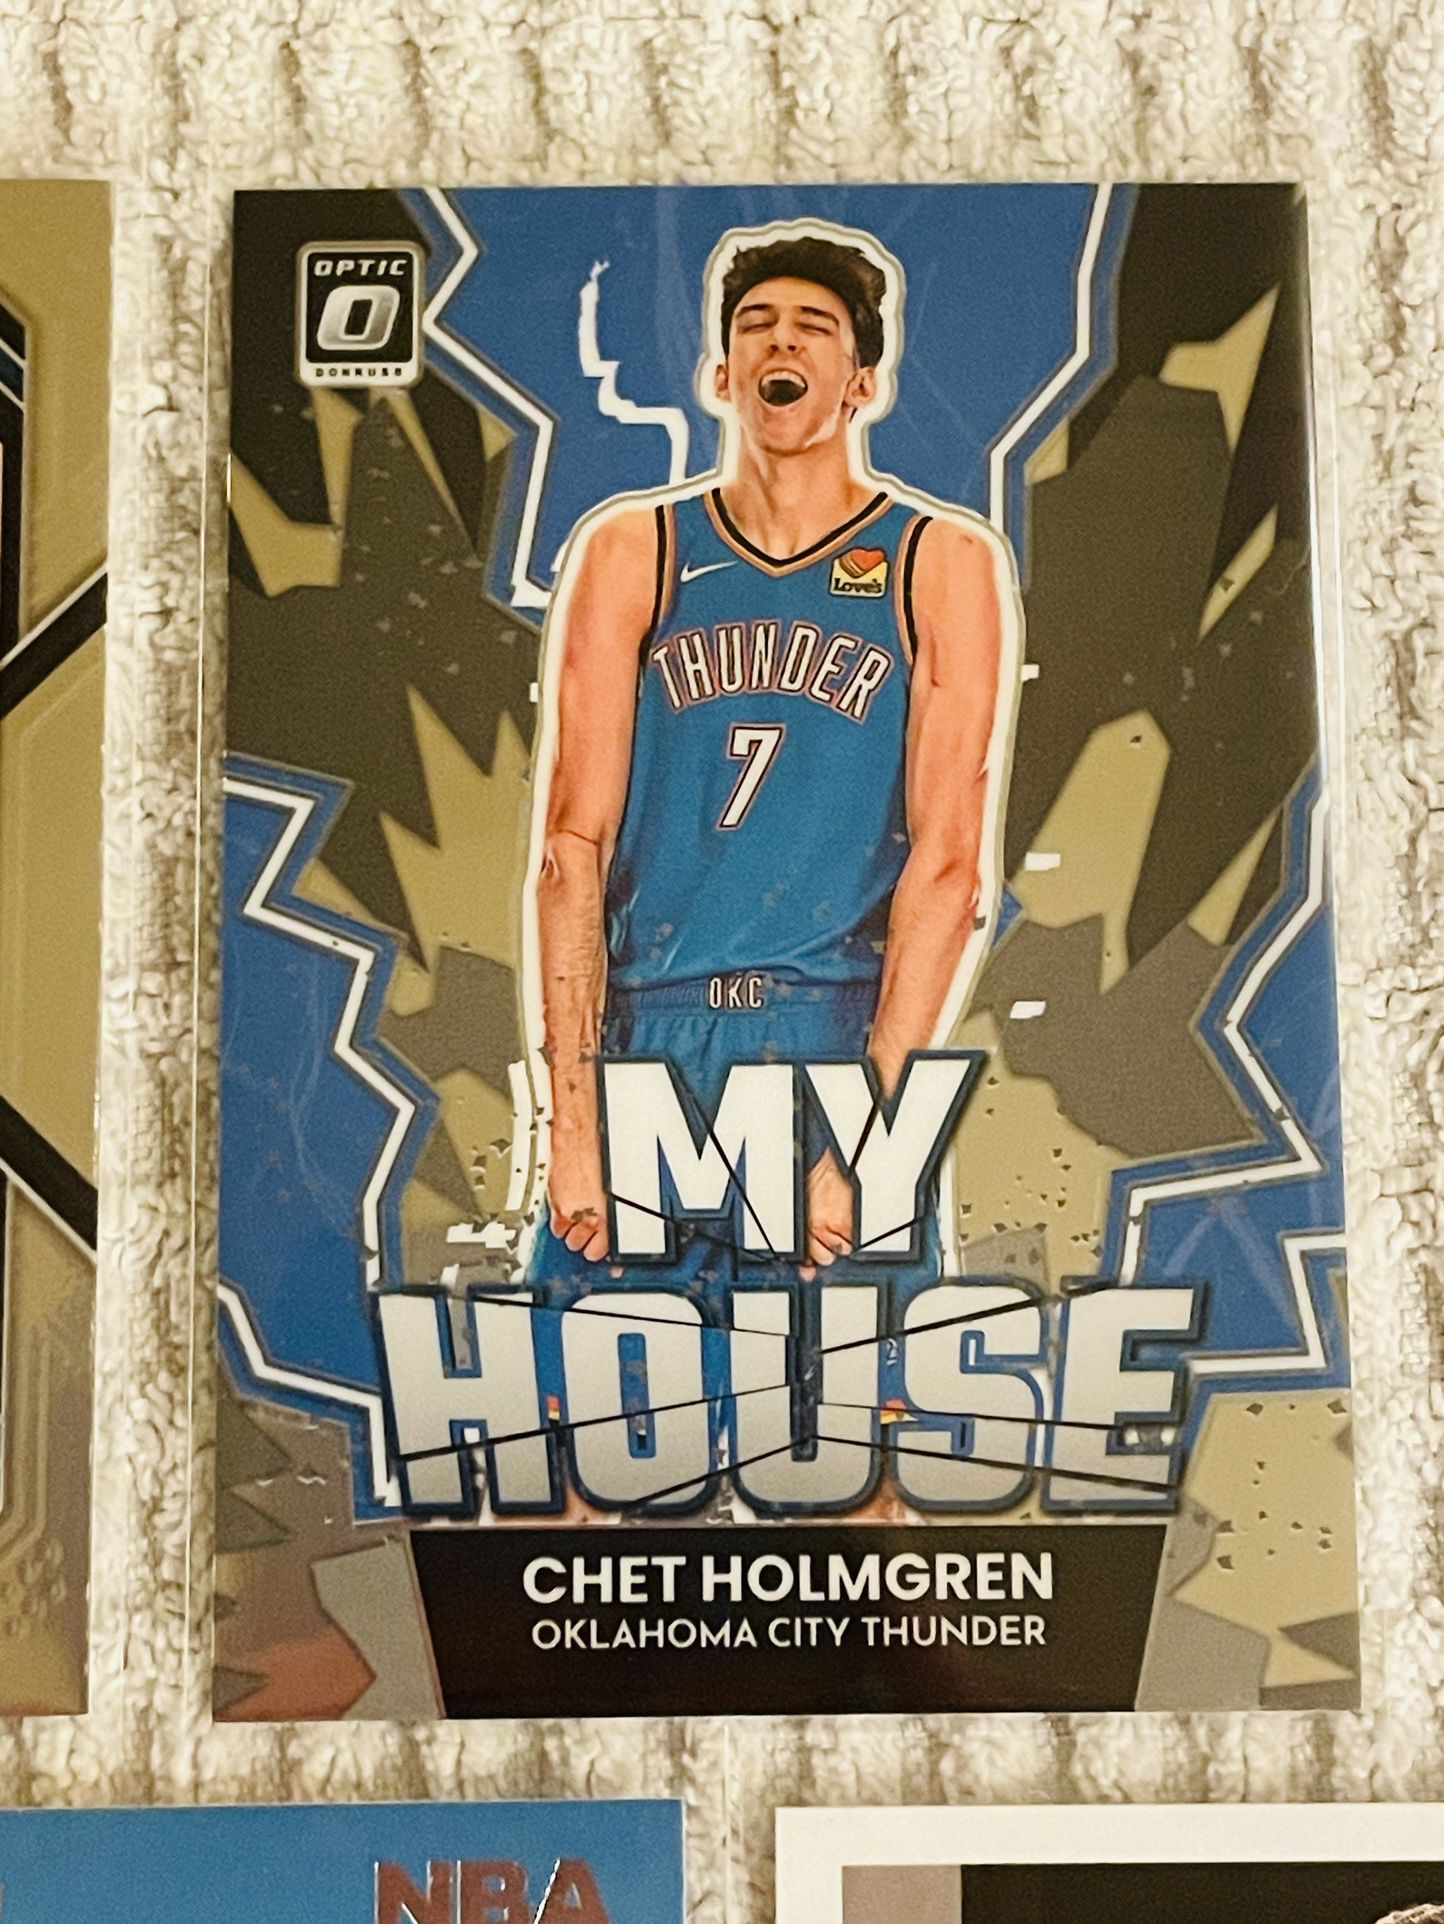 Chet Holmgren Oklahoma City Thunder 7 Card Rookie Lot! for Sale in